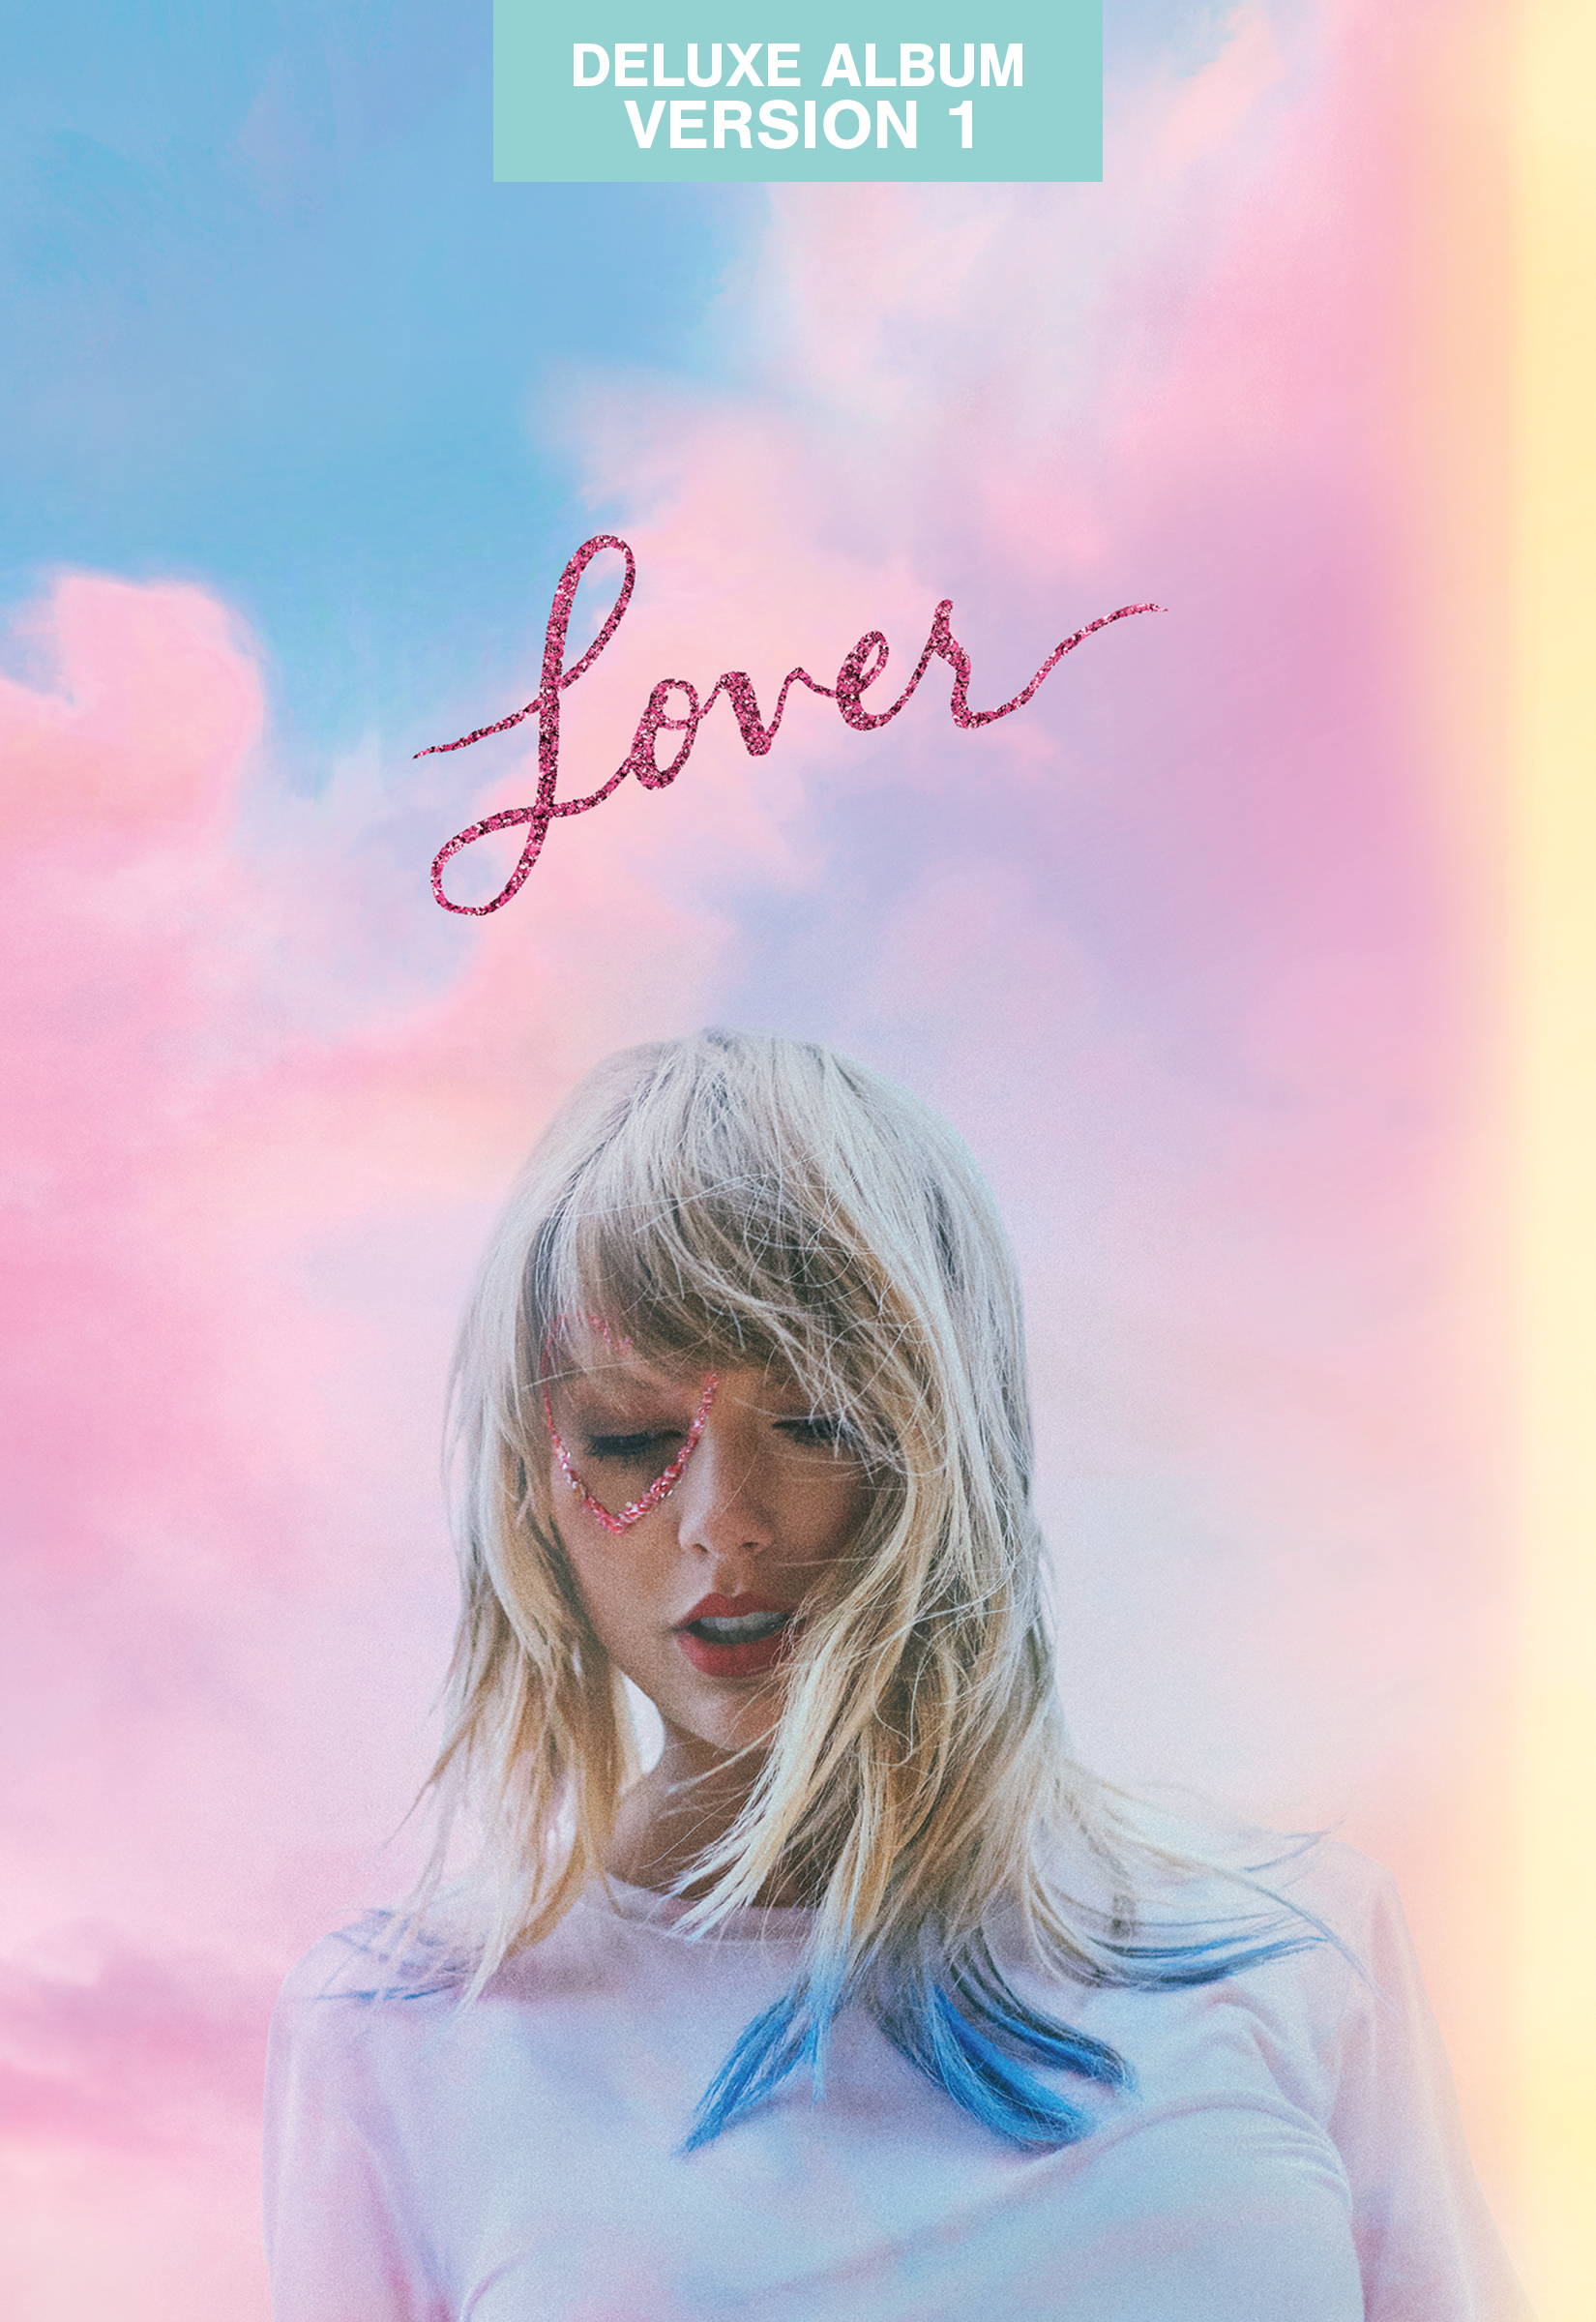 Deluxe Version 1 of Taylor Swift's new album Lover